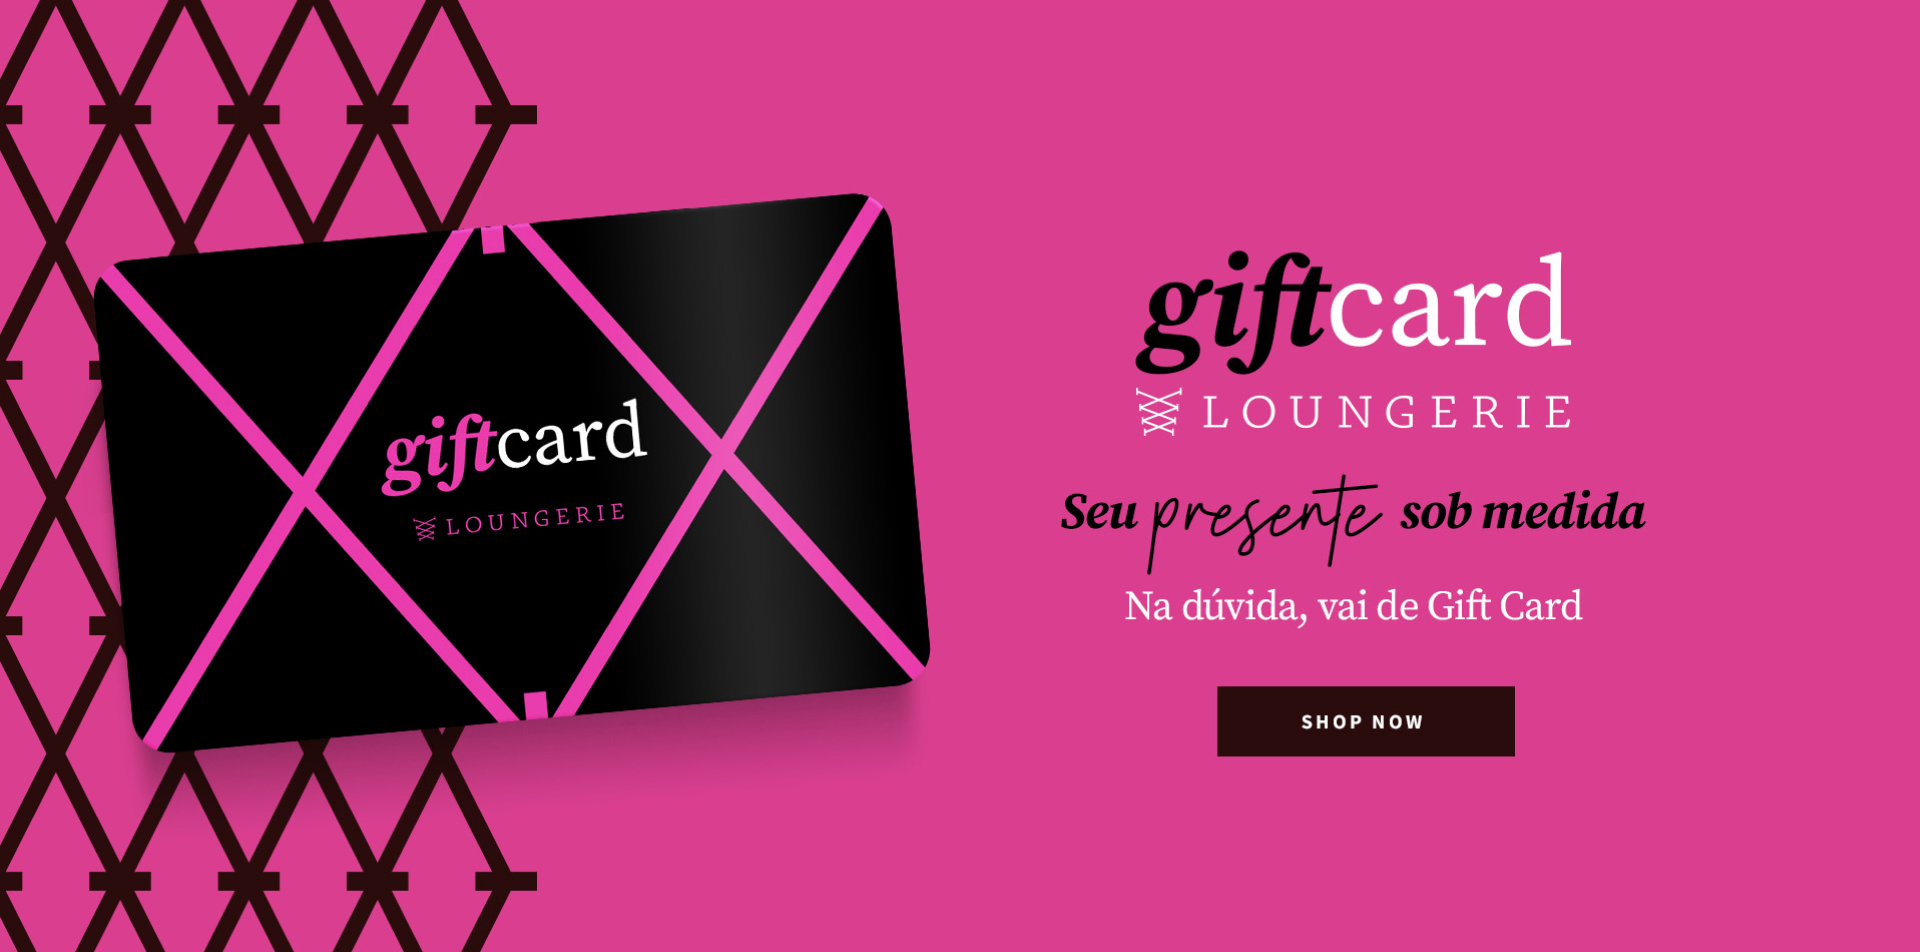 Gift Card - Loungerie